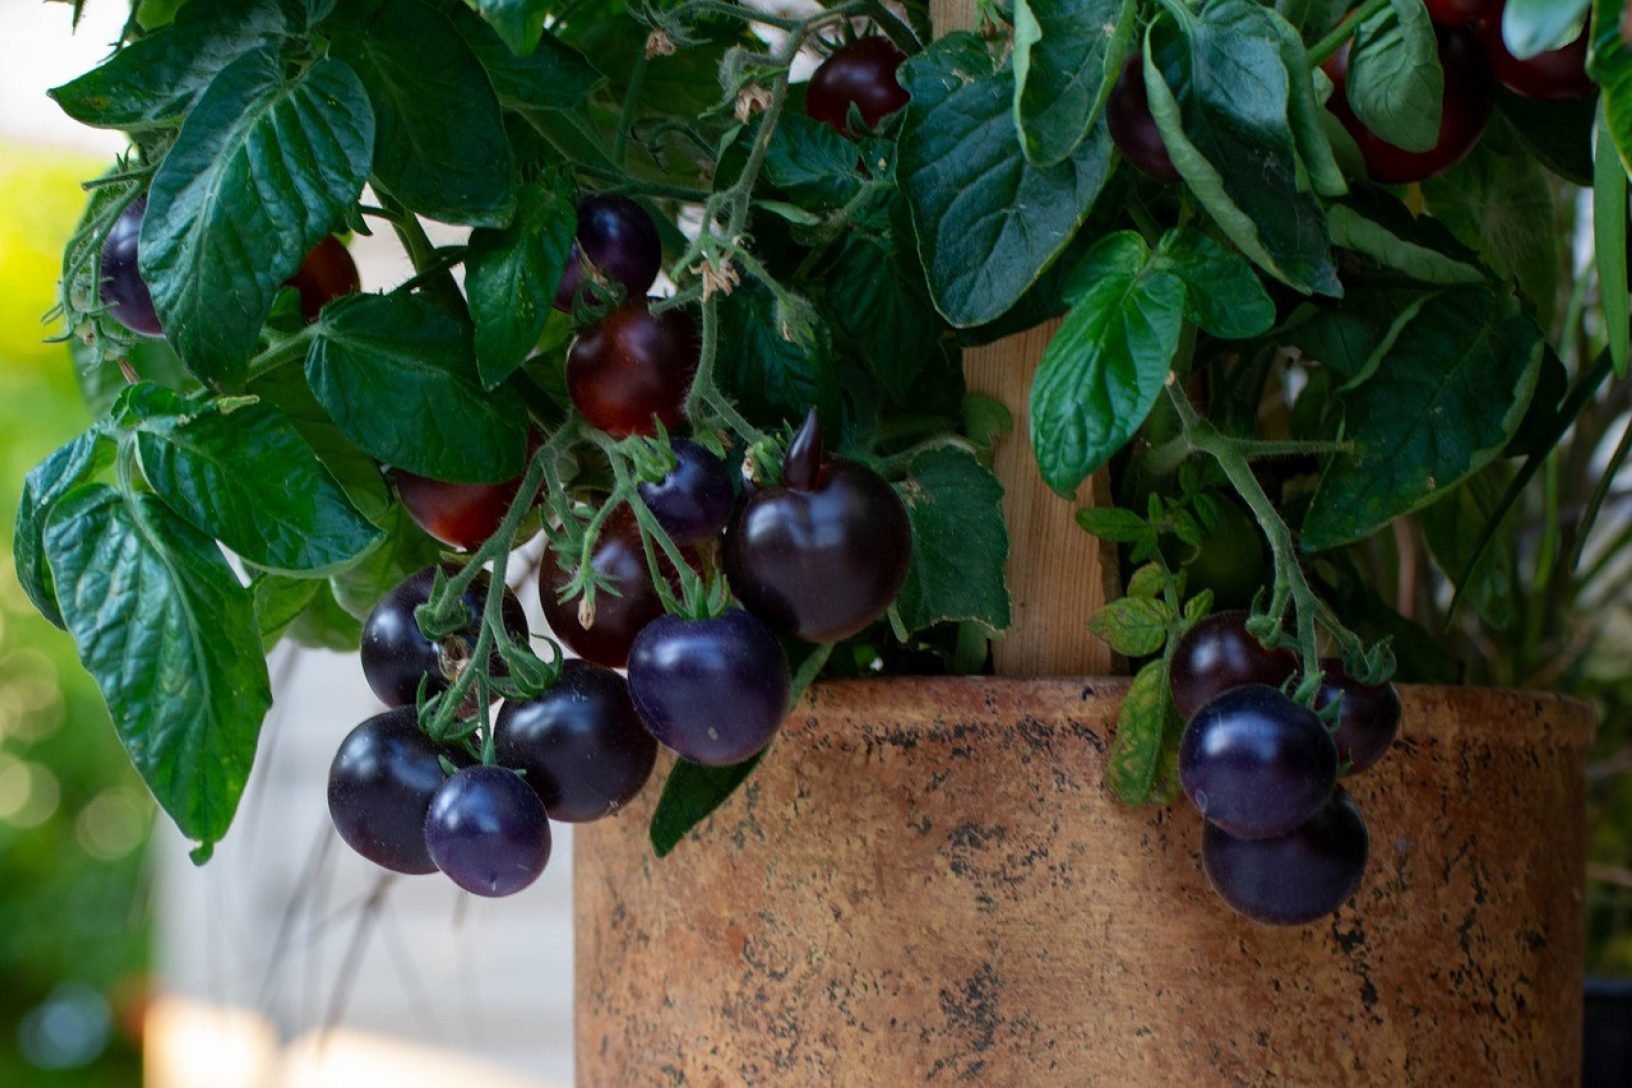 Dark tomatoes in container